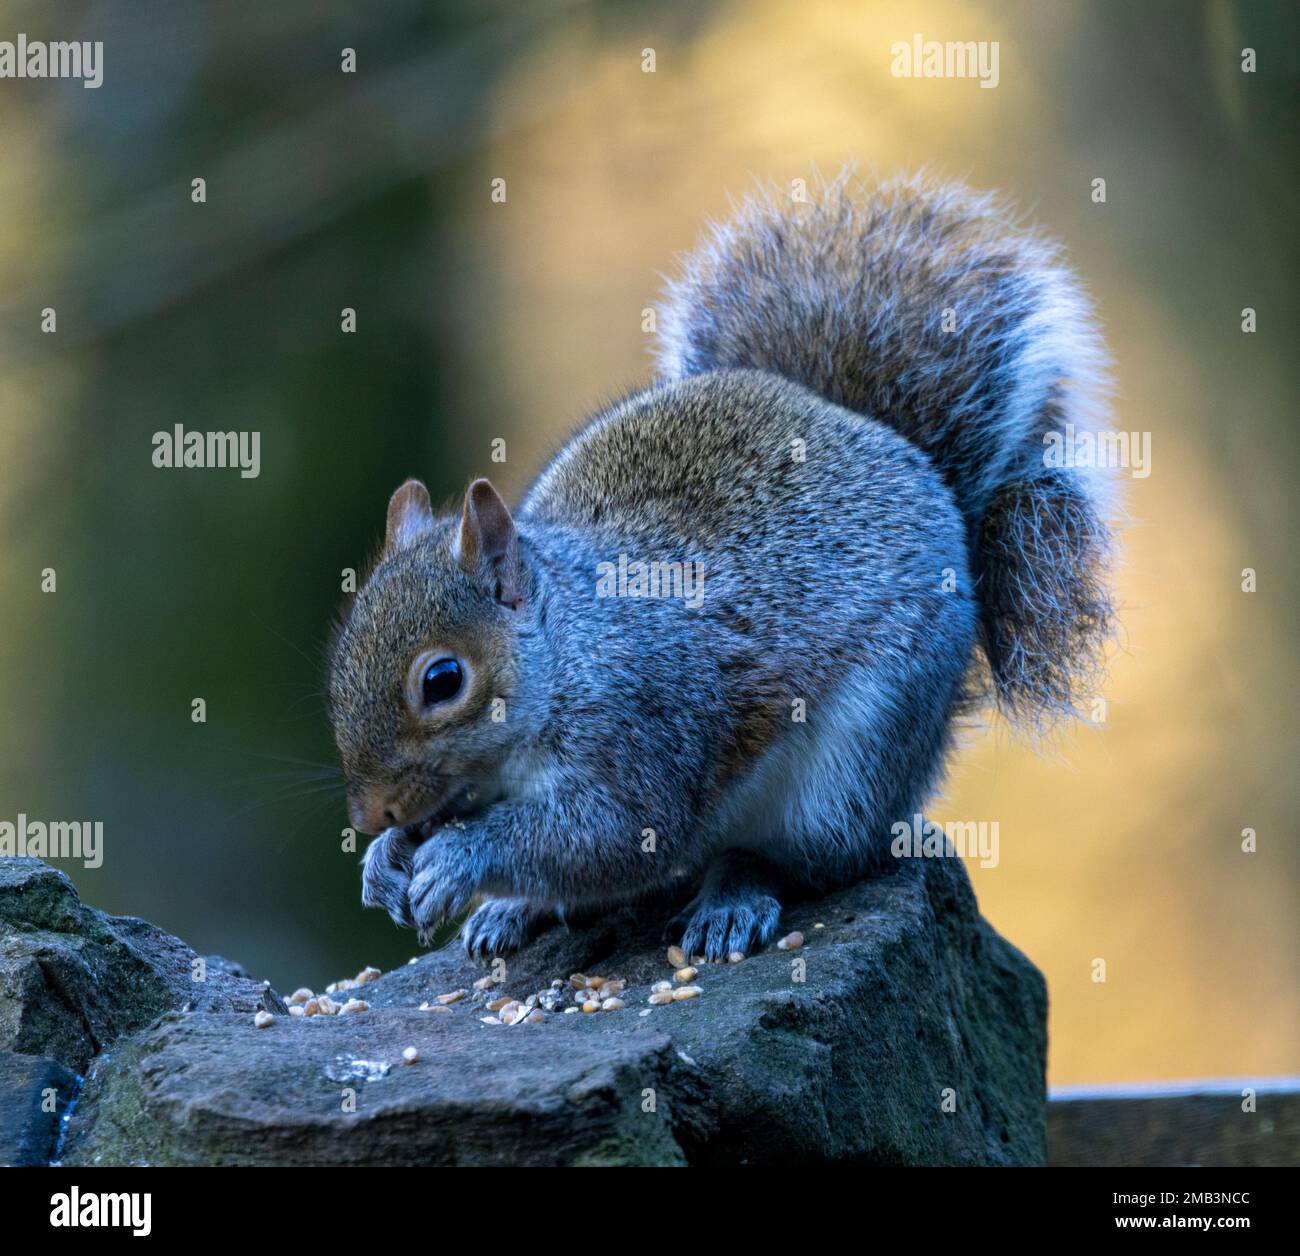 The Grey Squirrel is now a common sight in UK Parks and gardens, having been introduced from North America at the expense of indigenous Red Squirrels. Stock Photo